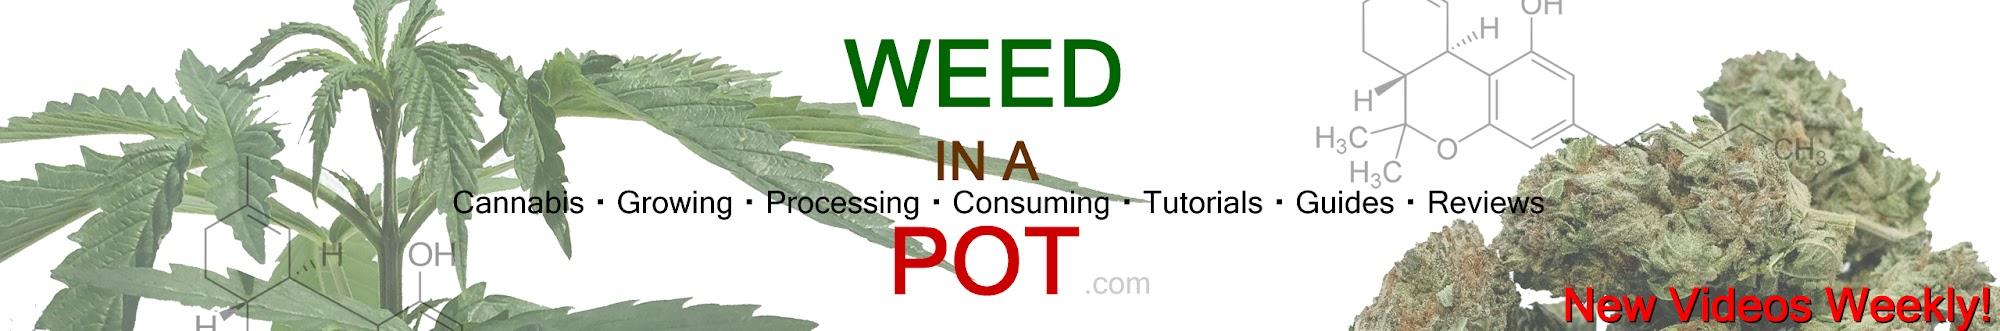 Weed In A Pot